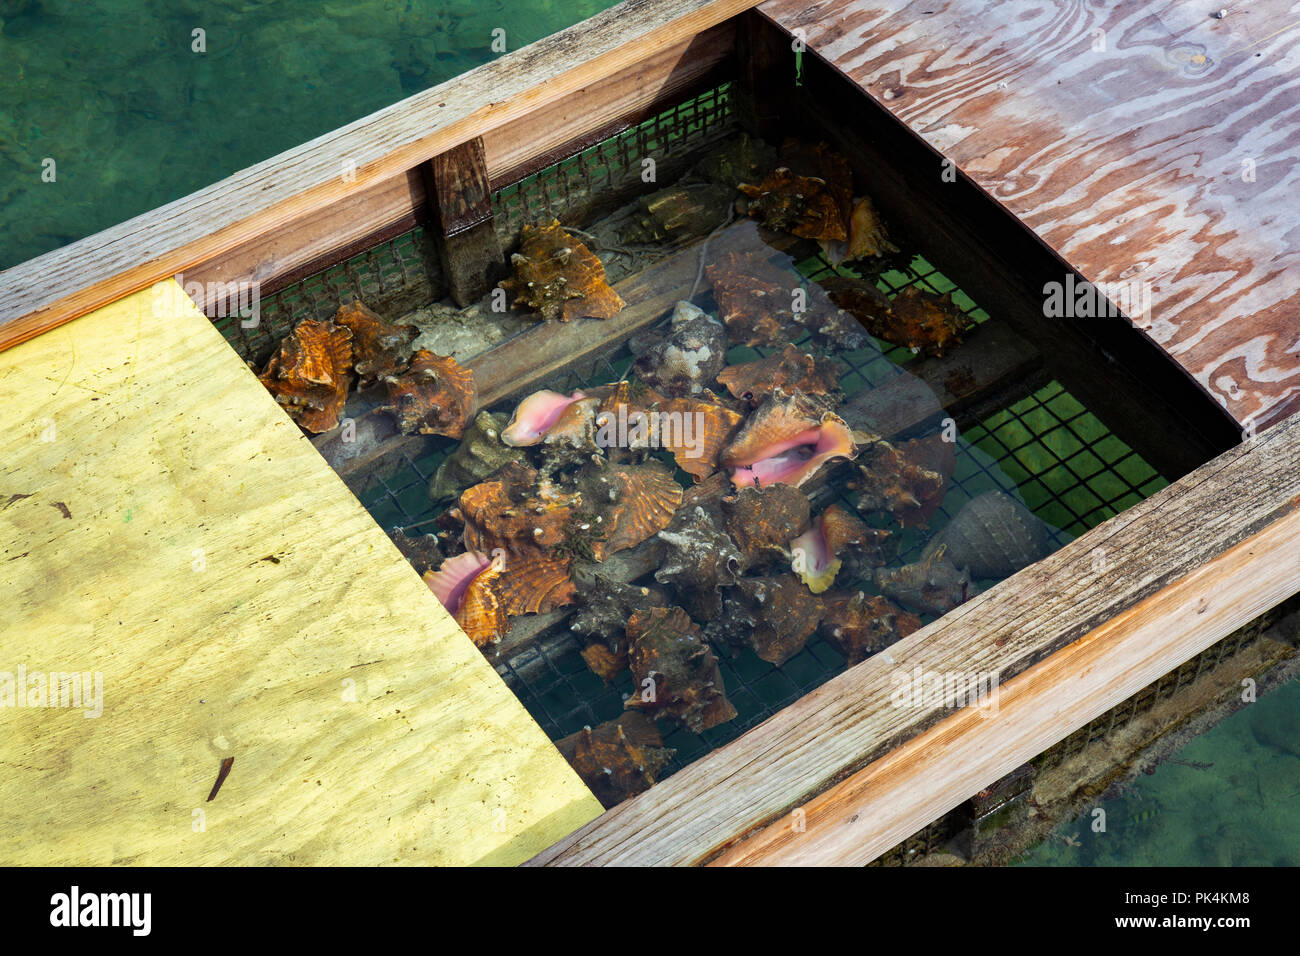 Collection of live conch in a trap in water Grand Cay Abacos Bahamas Stock Photo